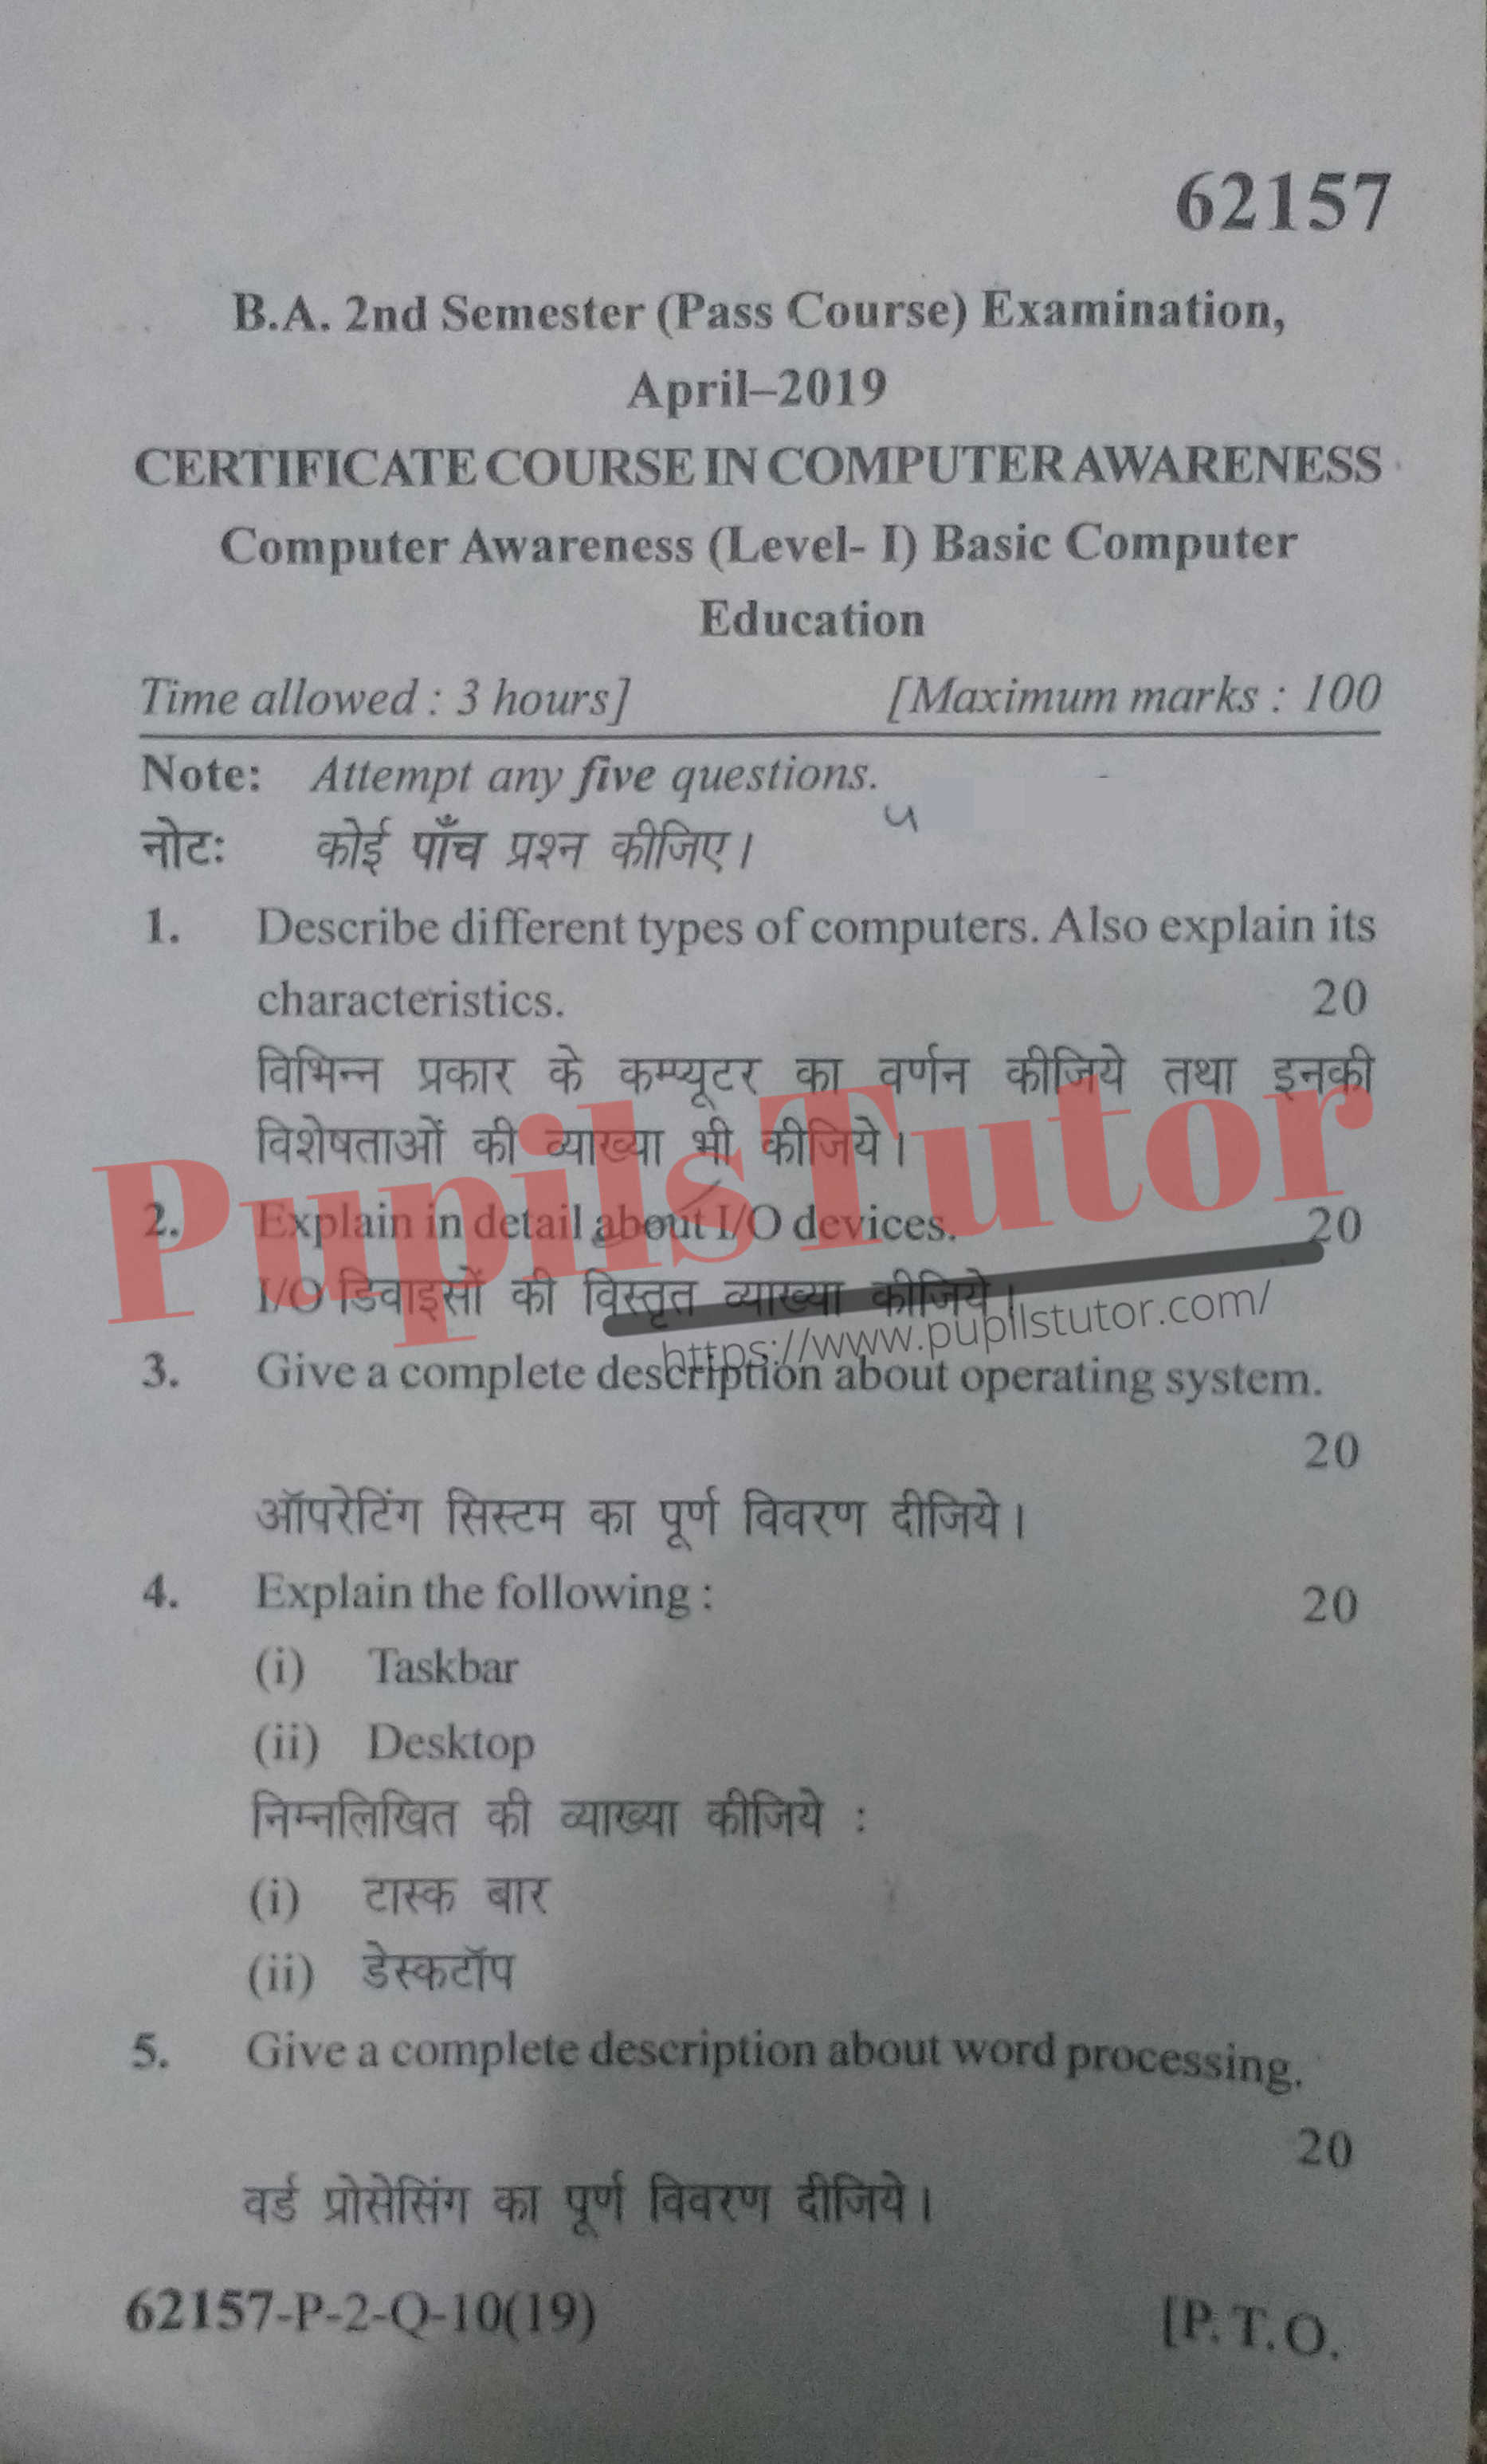 MDU (Maharshi Dayanand University, Rohtak Haryana) BA Pass Course Second Semester Previous Year Certificate Course In Computer Awareness Question Paper For April, 2019 Exam (Question Paper Page 1) - pupilstutor.com